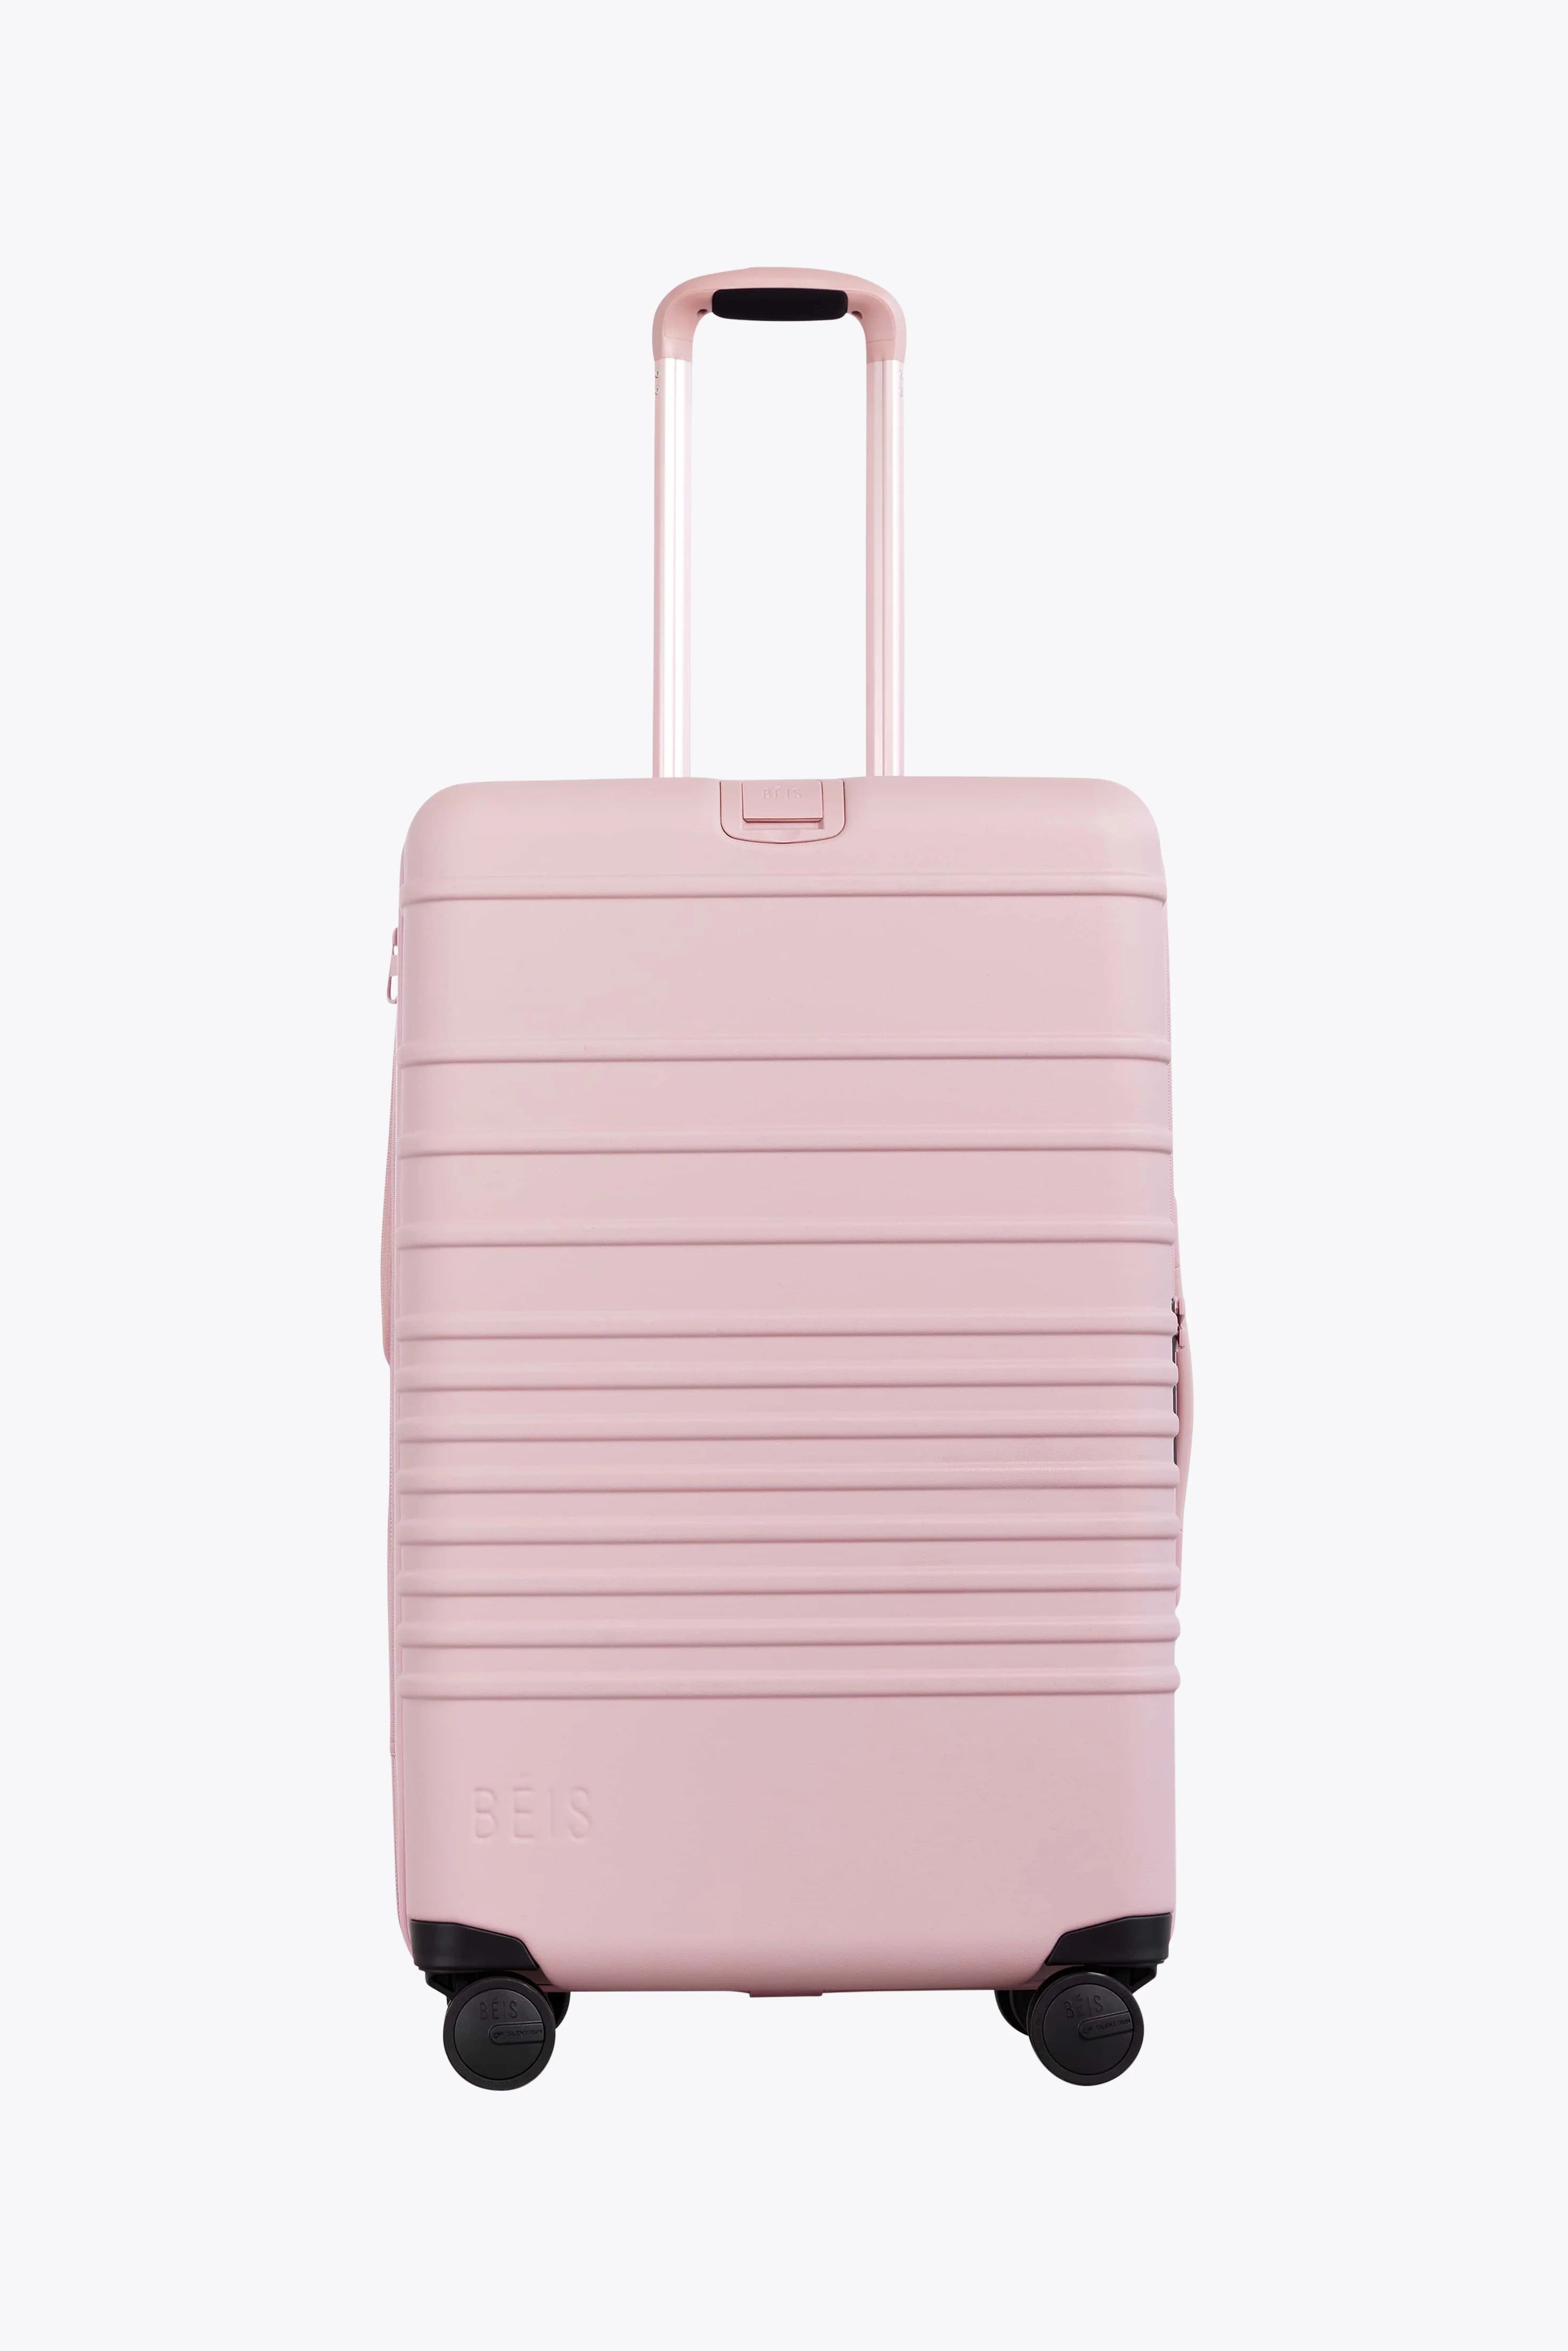 BÉIS 'The Medium Check-In Roller' in Atlas Pink - 26 In Pink Luggage & Pink Suitcase | BÉIS Travel